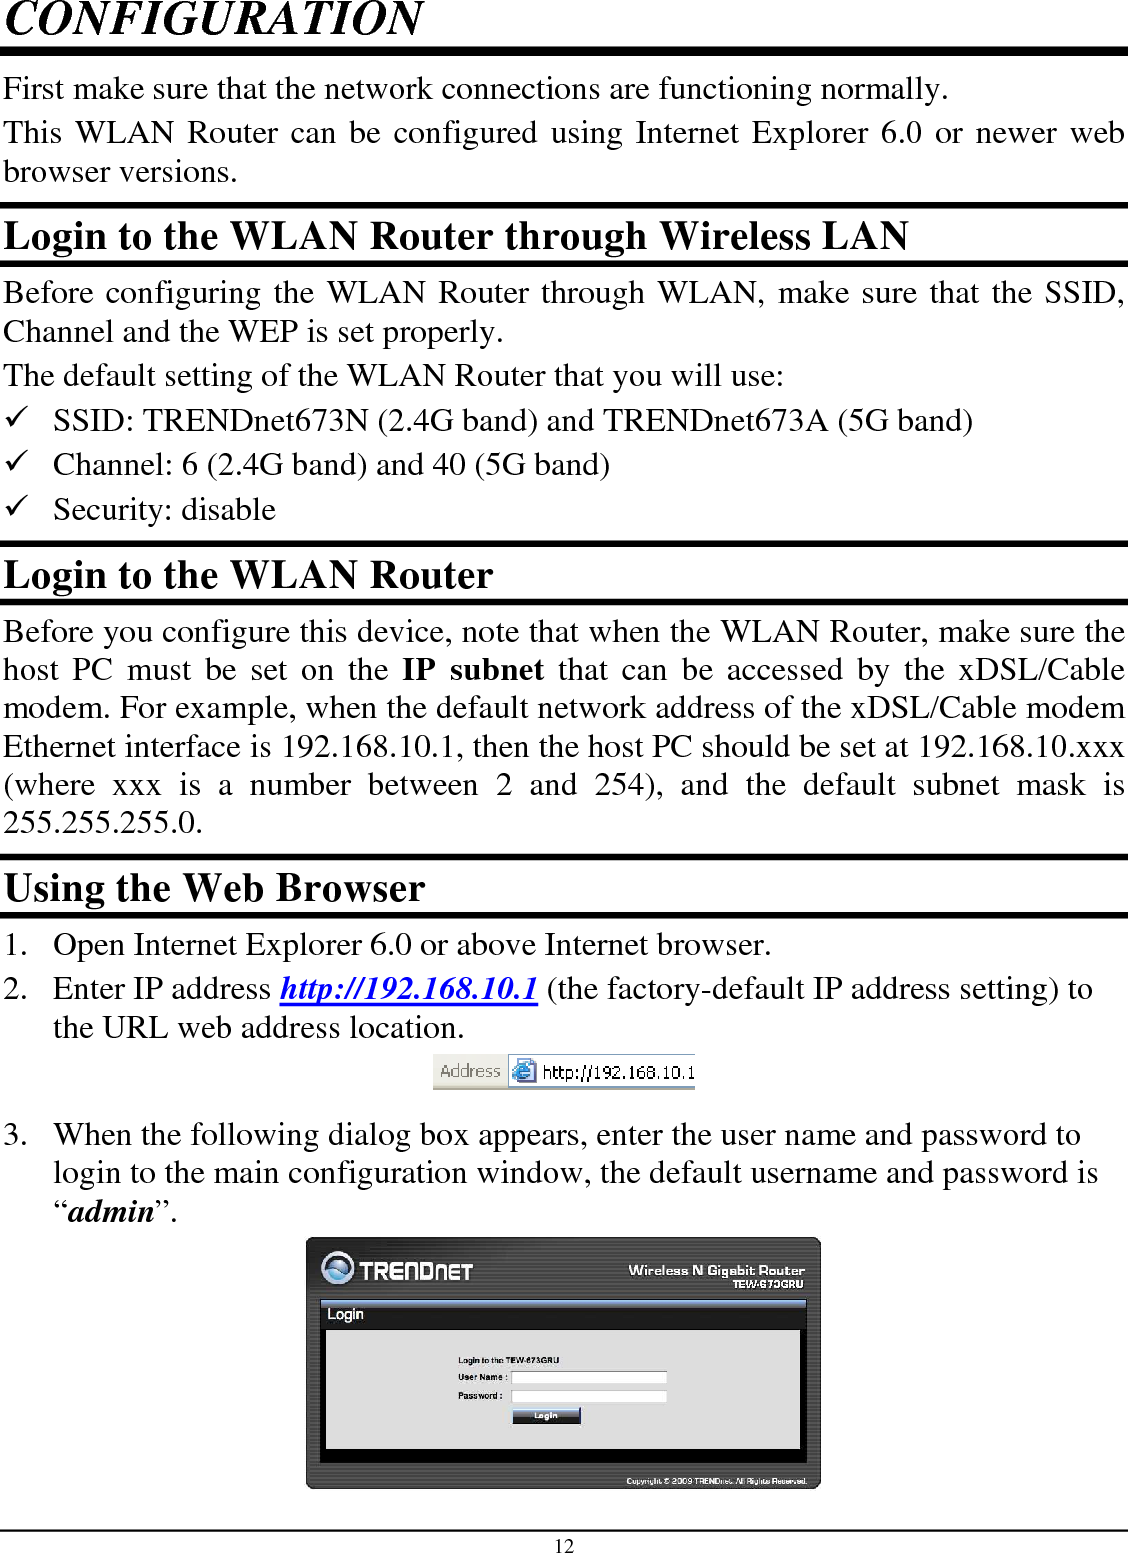 12 CONFIGURATION First make sure that the network connections are functioning normally.  This WLAN Router can be configured using Internet Explorer 6.0 or newer web browser versions. Login to the WLAN Router through Wireless LAN Before configuring the WLAN Router through WLAN, make sure that the SSID, Channel and the WEP is set properly. The default setting of the WLAN Router that you will use:  SSID: TRENDnet673N (2.4G band) and TRENDnet673A (5G band)  Channel: 6 (2.4G band) and 40 (5G band)  Security: disable Login to the WLAN Router Before you configure this device, note that when the WLAN Router, make sure the host  PC  must  be  set  on  the  IP  subnet  that  can  be  accessed  by  the  xDSL/Cable modem. For example, when the default network address of the xDSL/Cable modem Ethernet interface is 192.168.10.1, then the host PC should be set at 192.168.10.xxx (where  xxx  is  a  number  between  2  and  254),  and  the  default  subnet  mask  is 255.255.255.0. Using the Web Browser 1. Open Internet Explorer 6.0 or above Internet browser. 2. Enter IP address http://192.168.10.1 (the factory-default IP address setting) to the URL web address location.  3. When the following dialog box appears, enter the user name and password to login to the main configuration window, the default username and password is “admin”.  